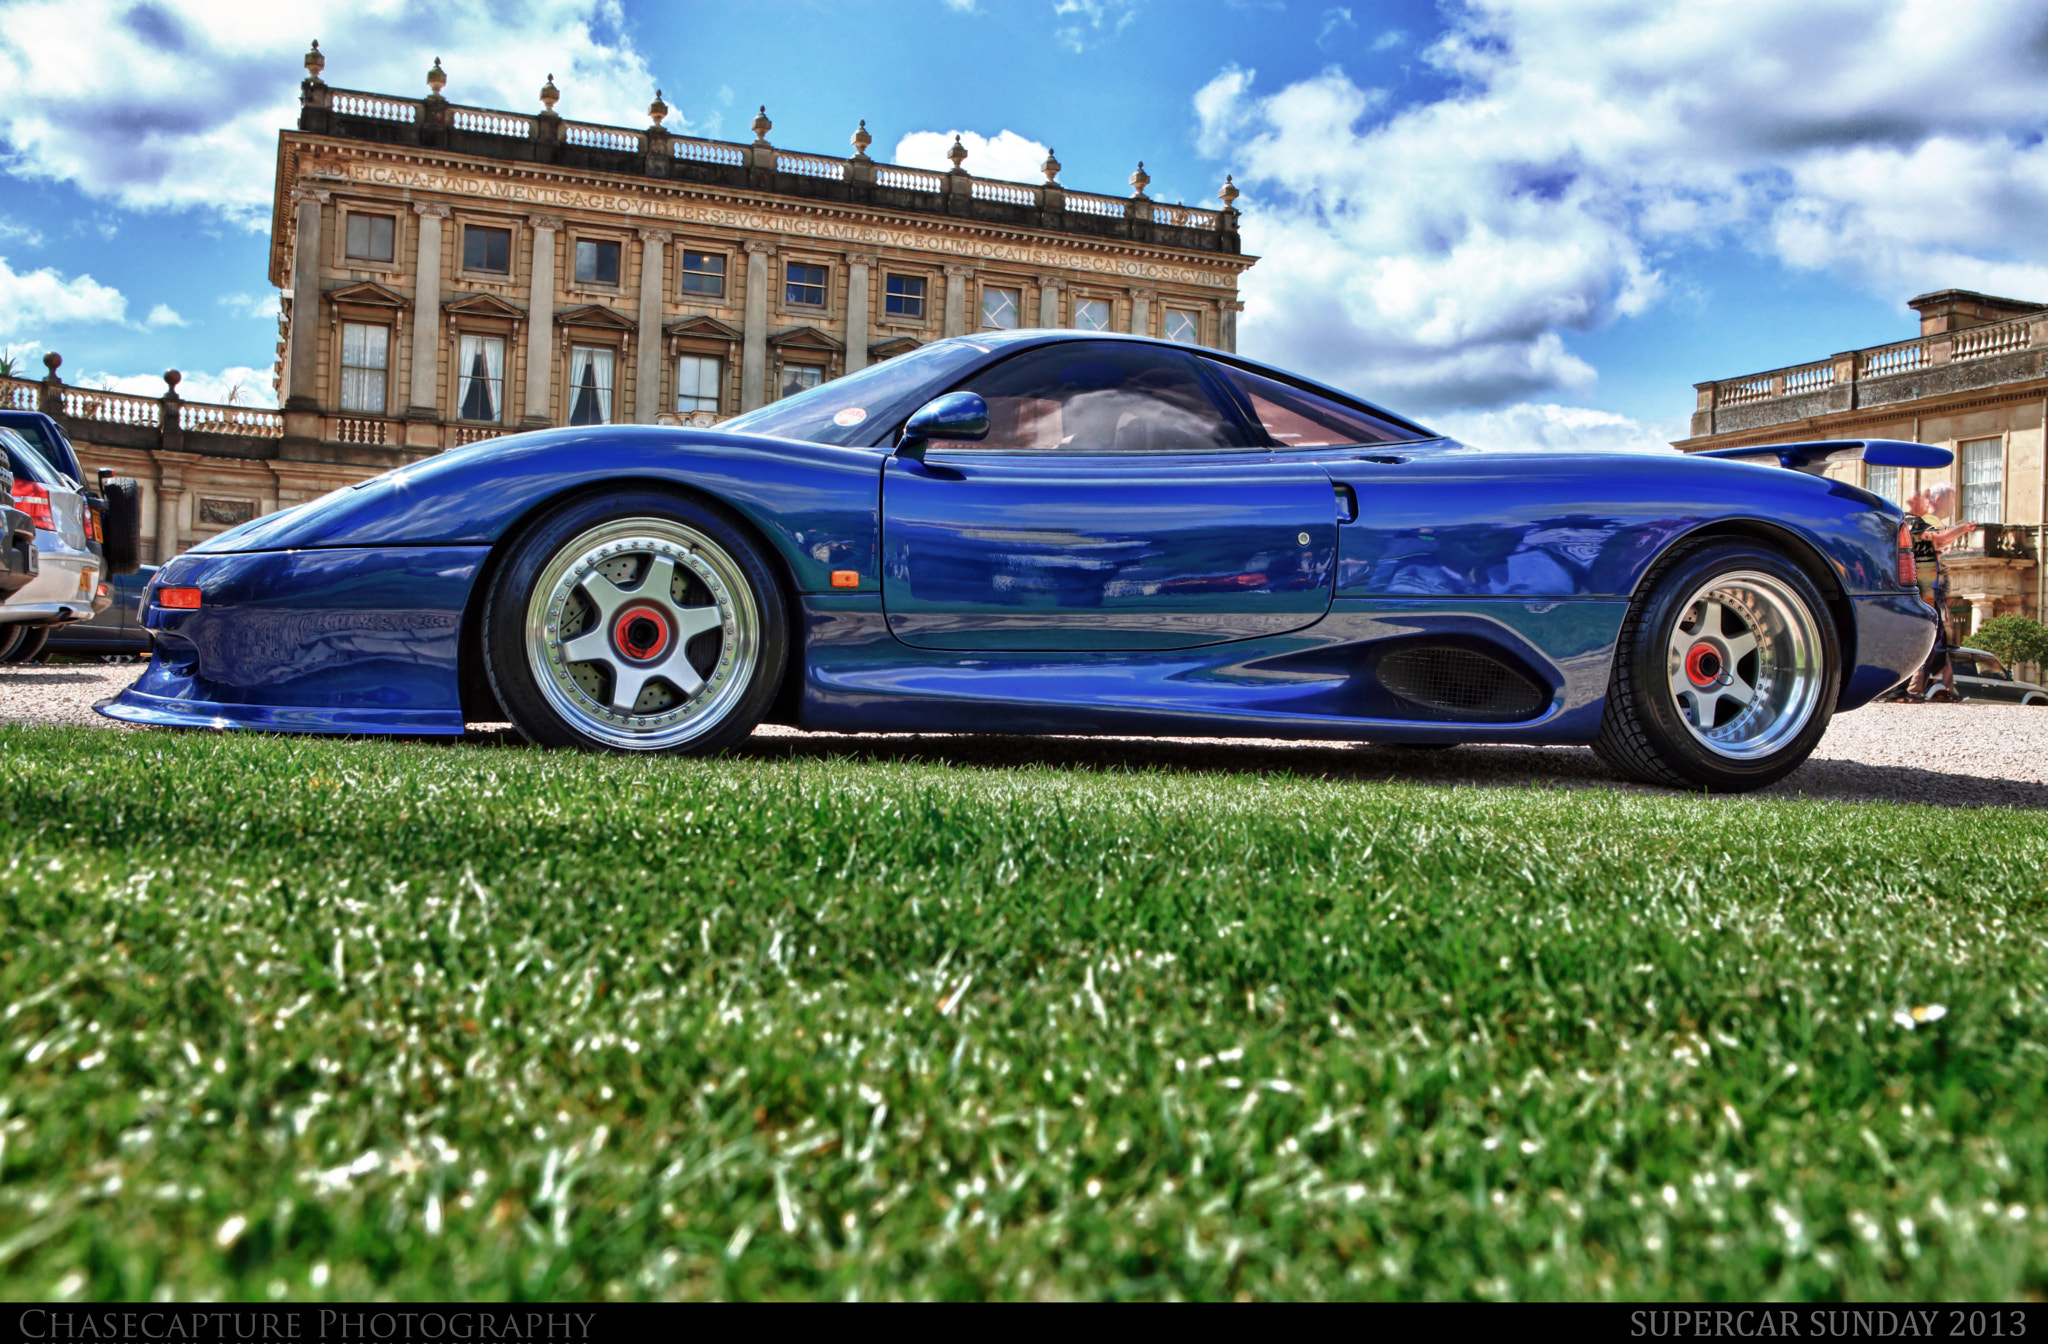 Rare! Jaguar XJR-15 by Chasecapture Photography / 500px